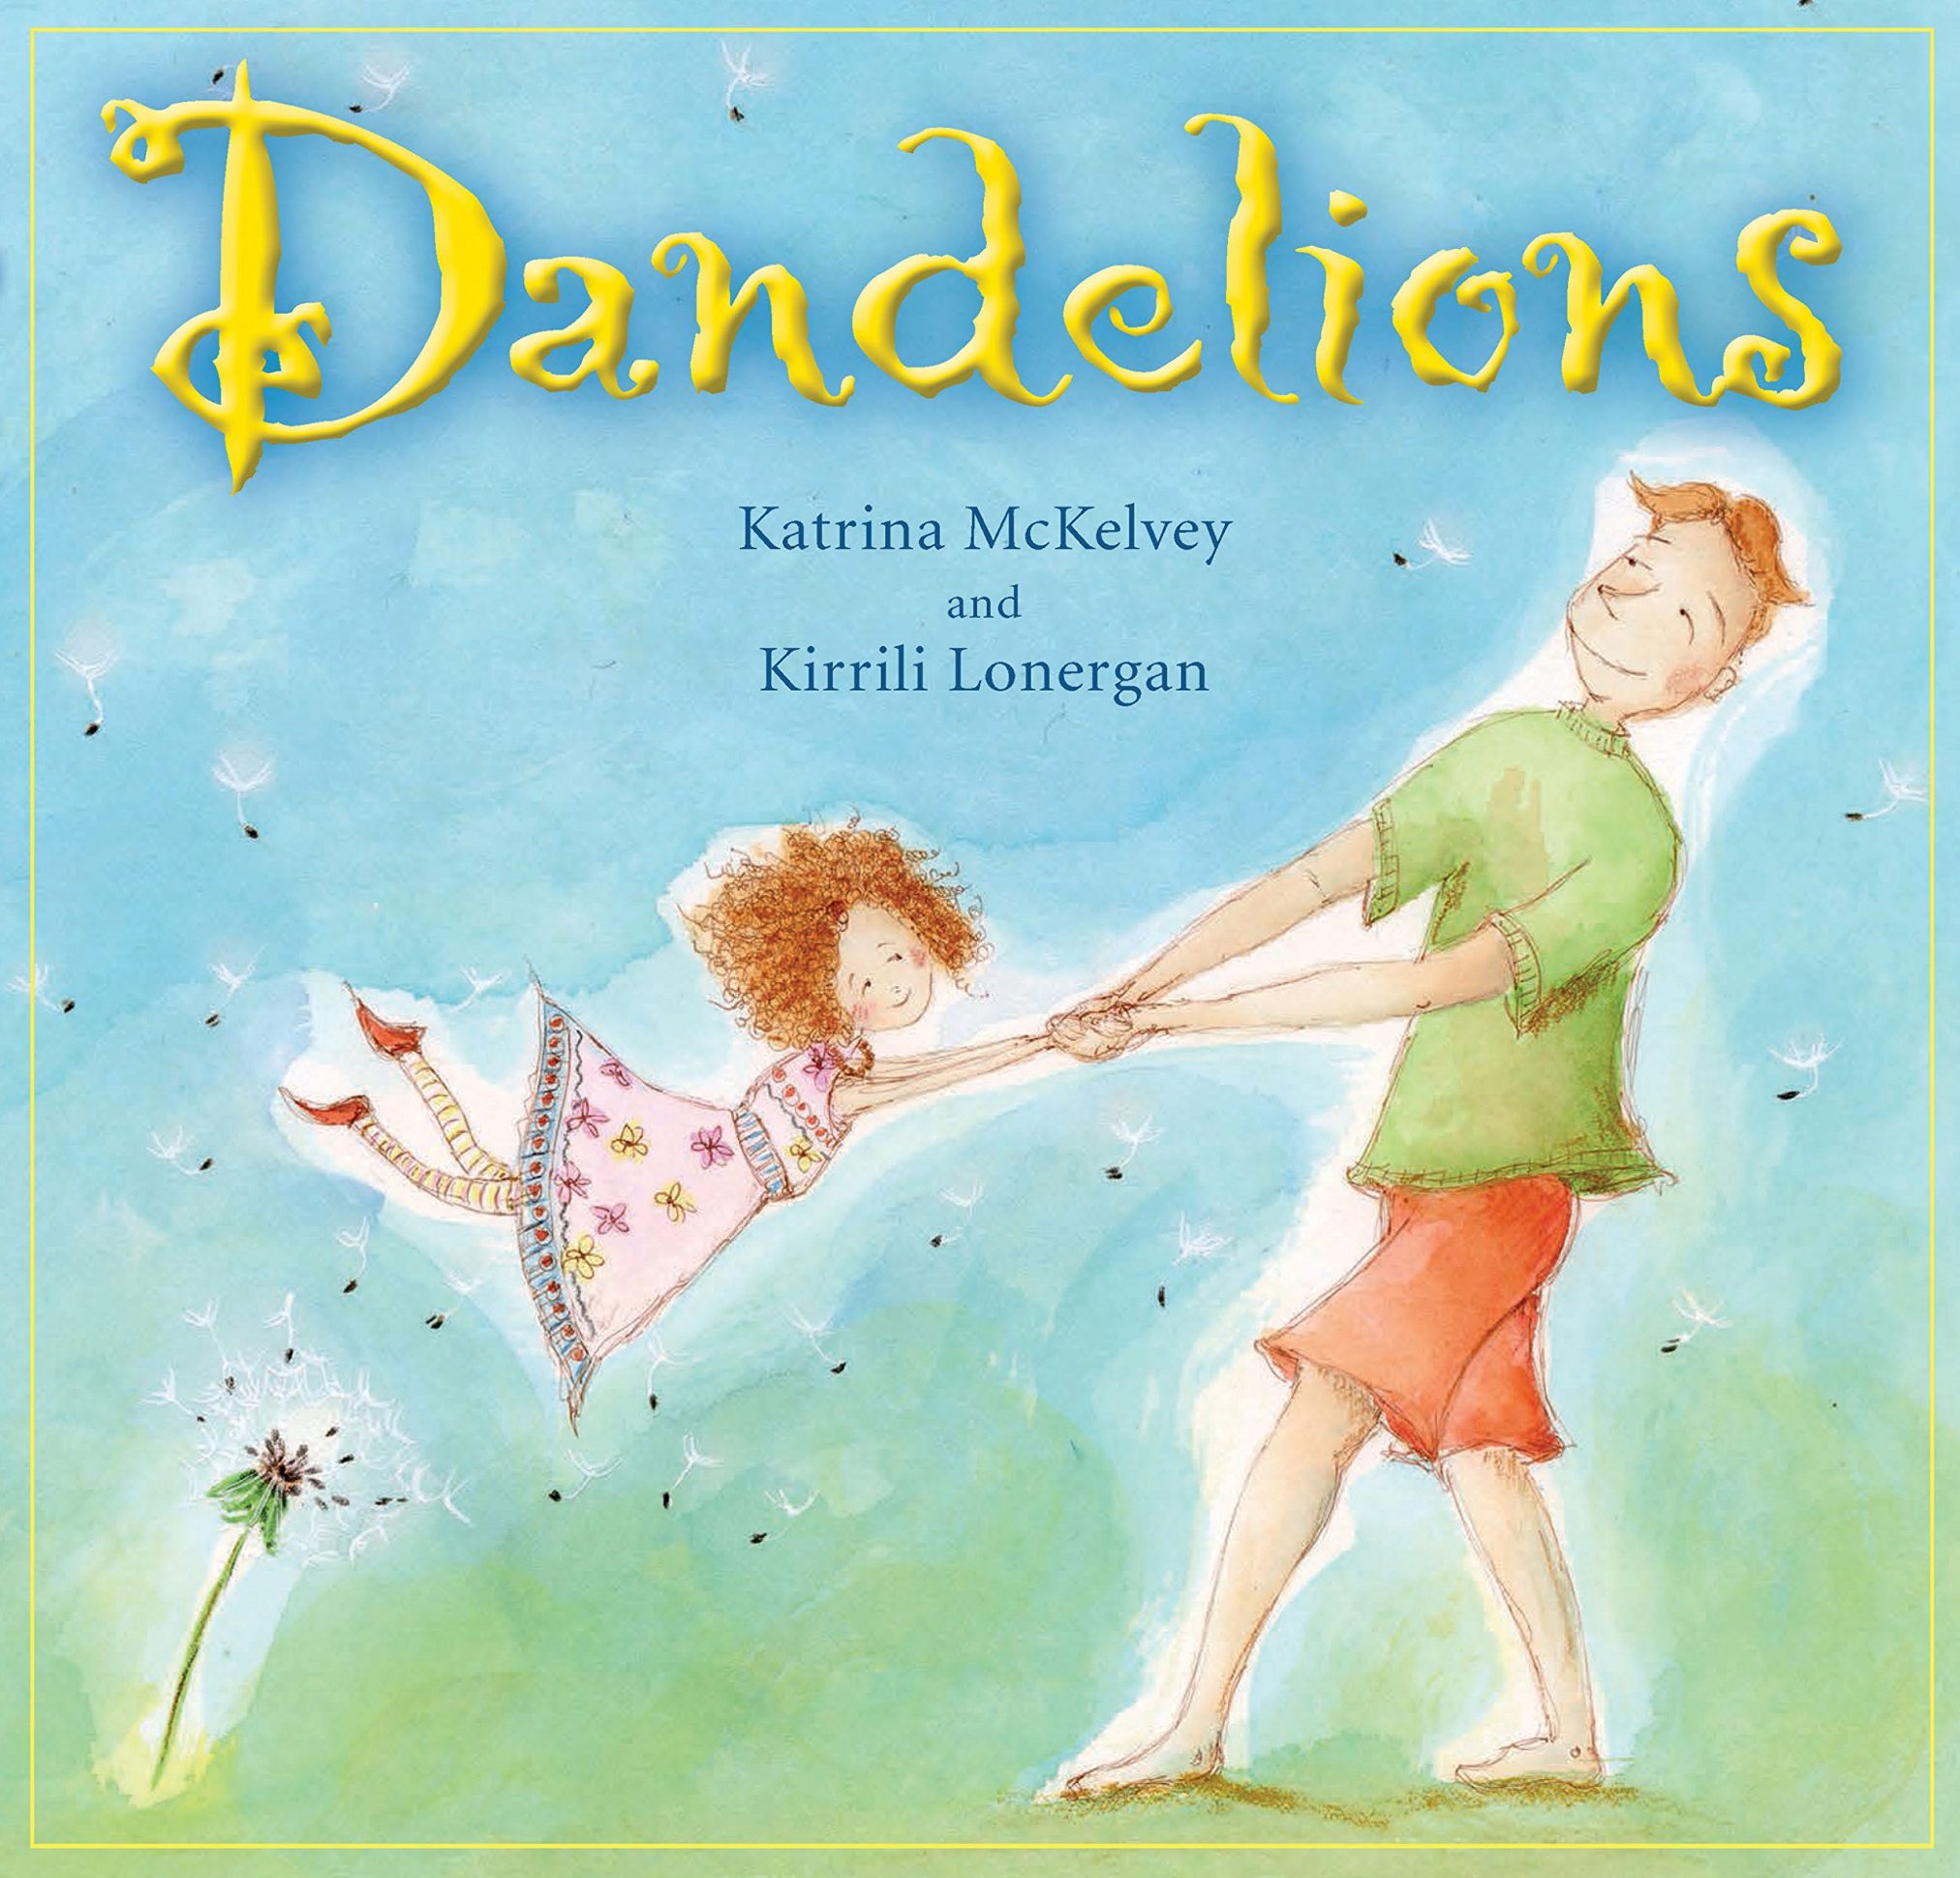 From cute stories to scientific facts, these books about dandelions are sure to help you learn about those lovely miniature suns outside your window.  #kidlit #picturebooks #raisingreaders #kidbooks #storytime #kidminds